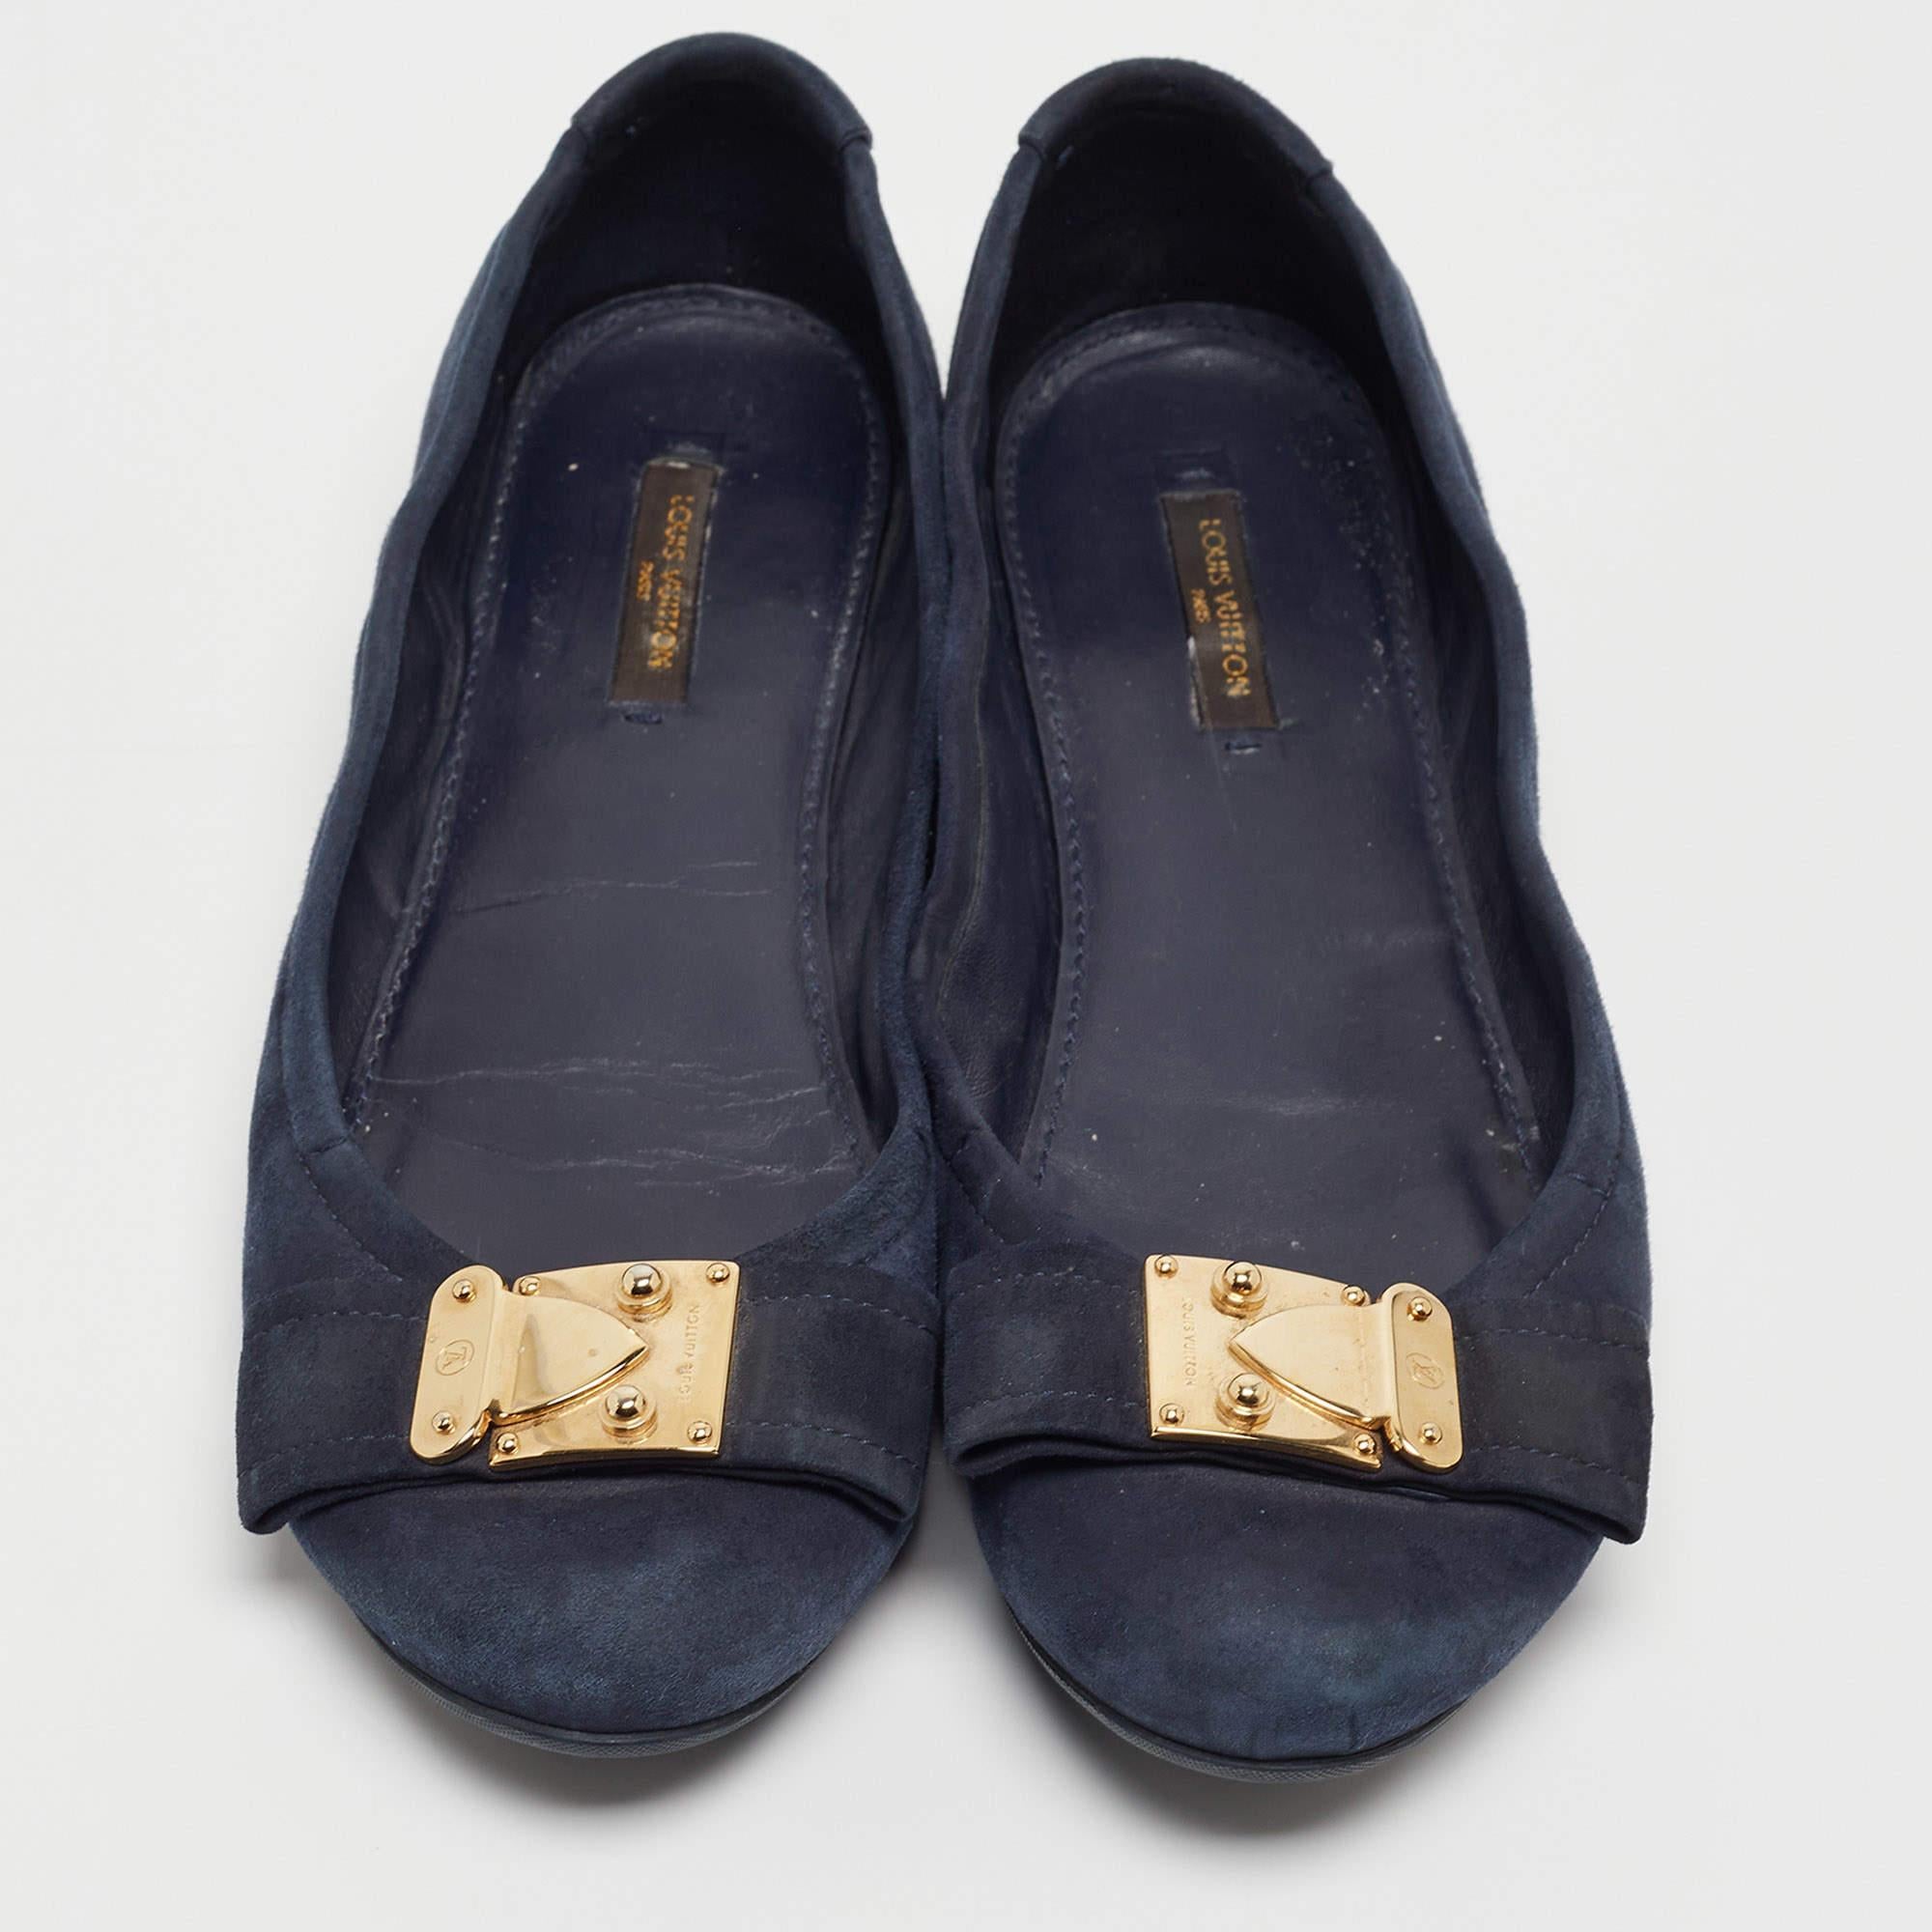 These beautiful Louis Vuitton ballet flats are perfect for long hours of use and just chic enough to wear to work. Constructed using suede, these shoes feature a signature lock accent on the uppers.

